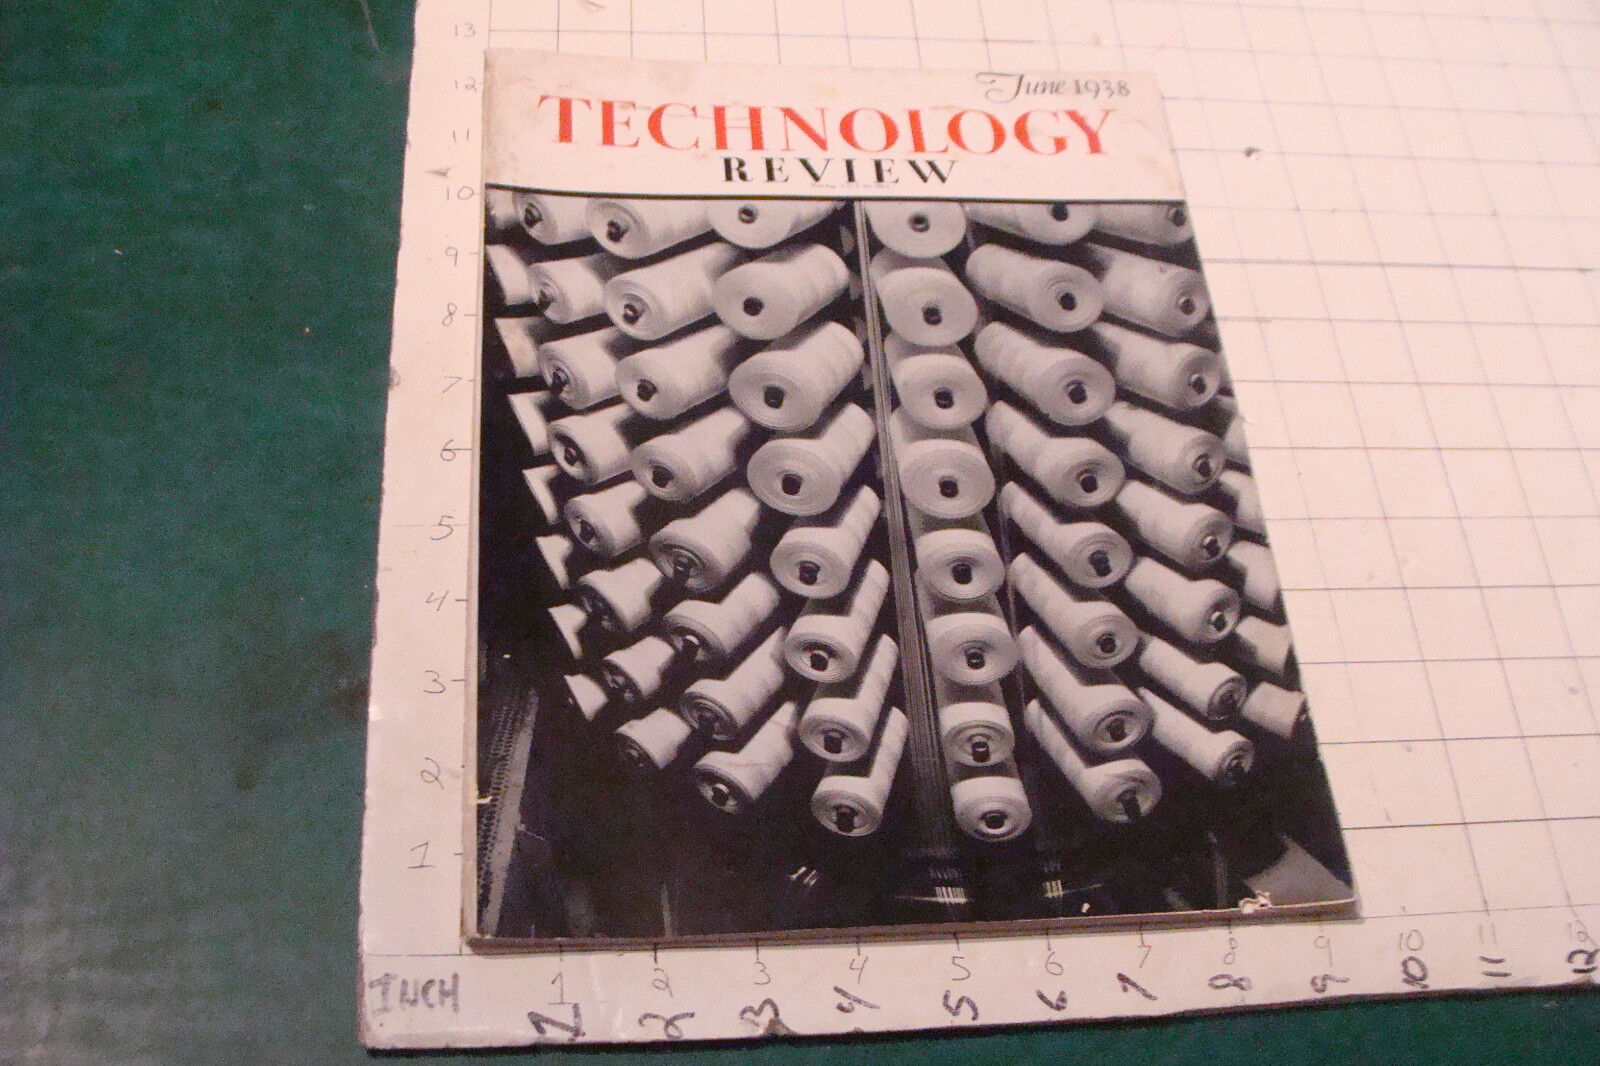 MIT-Technology Review: JUNE1938 ATOMS; OIL; WIND TUNNELS; SOLAR POWER; 